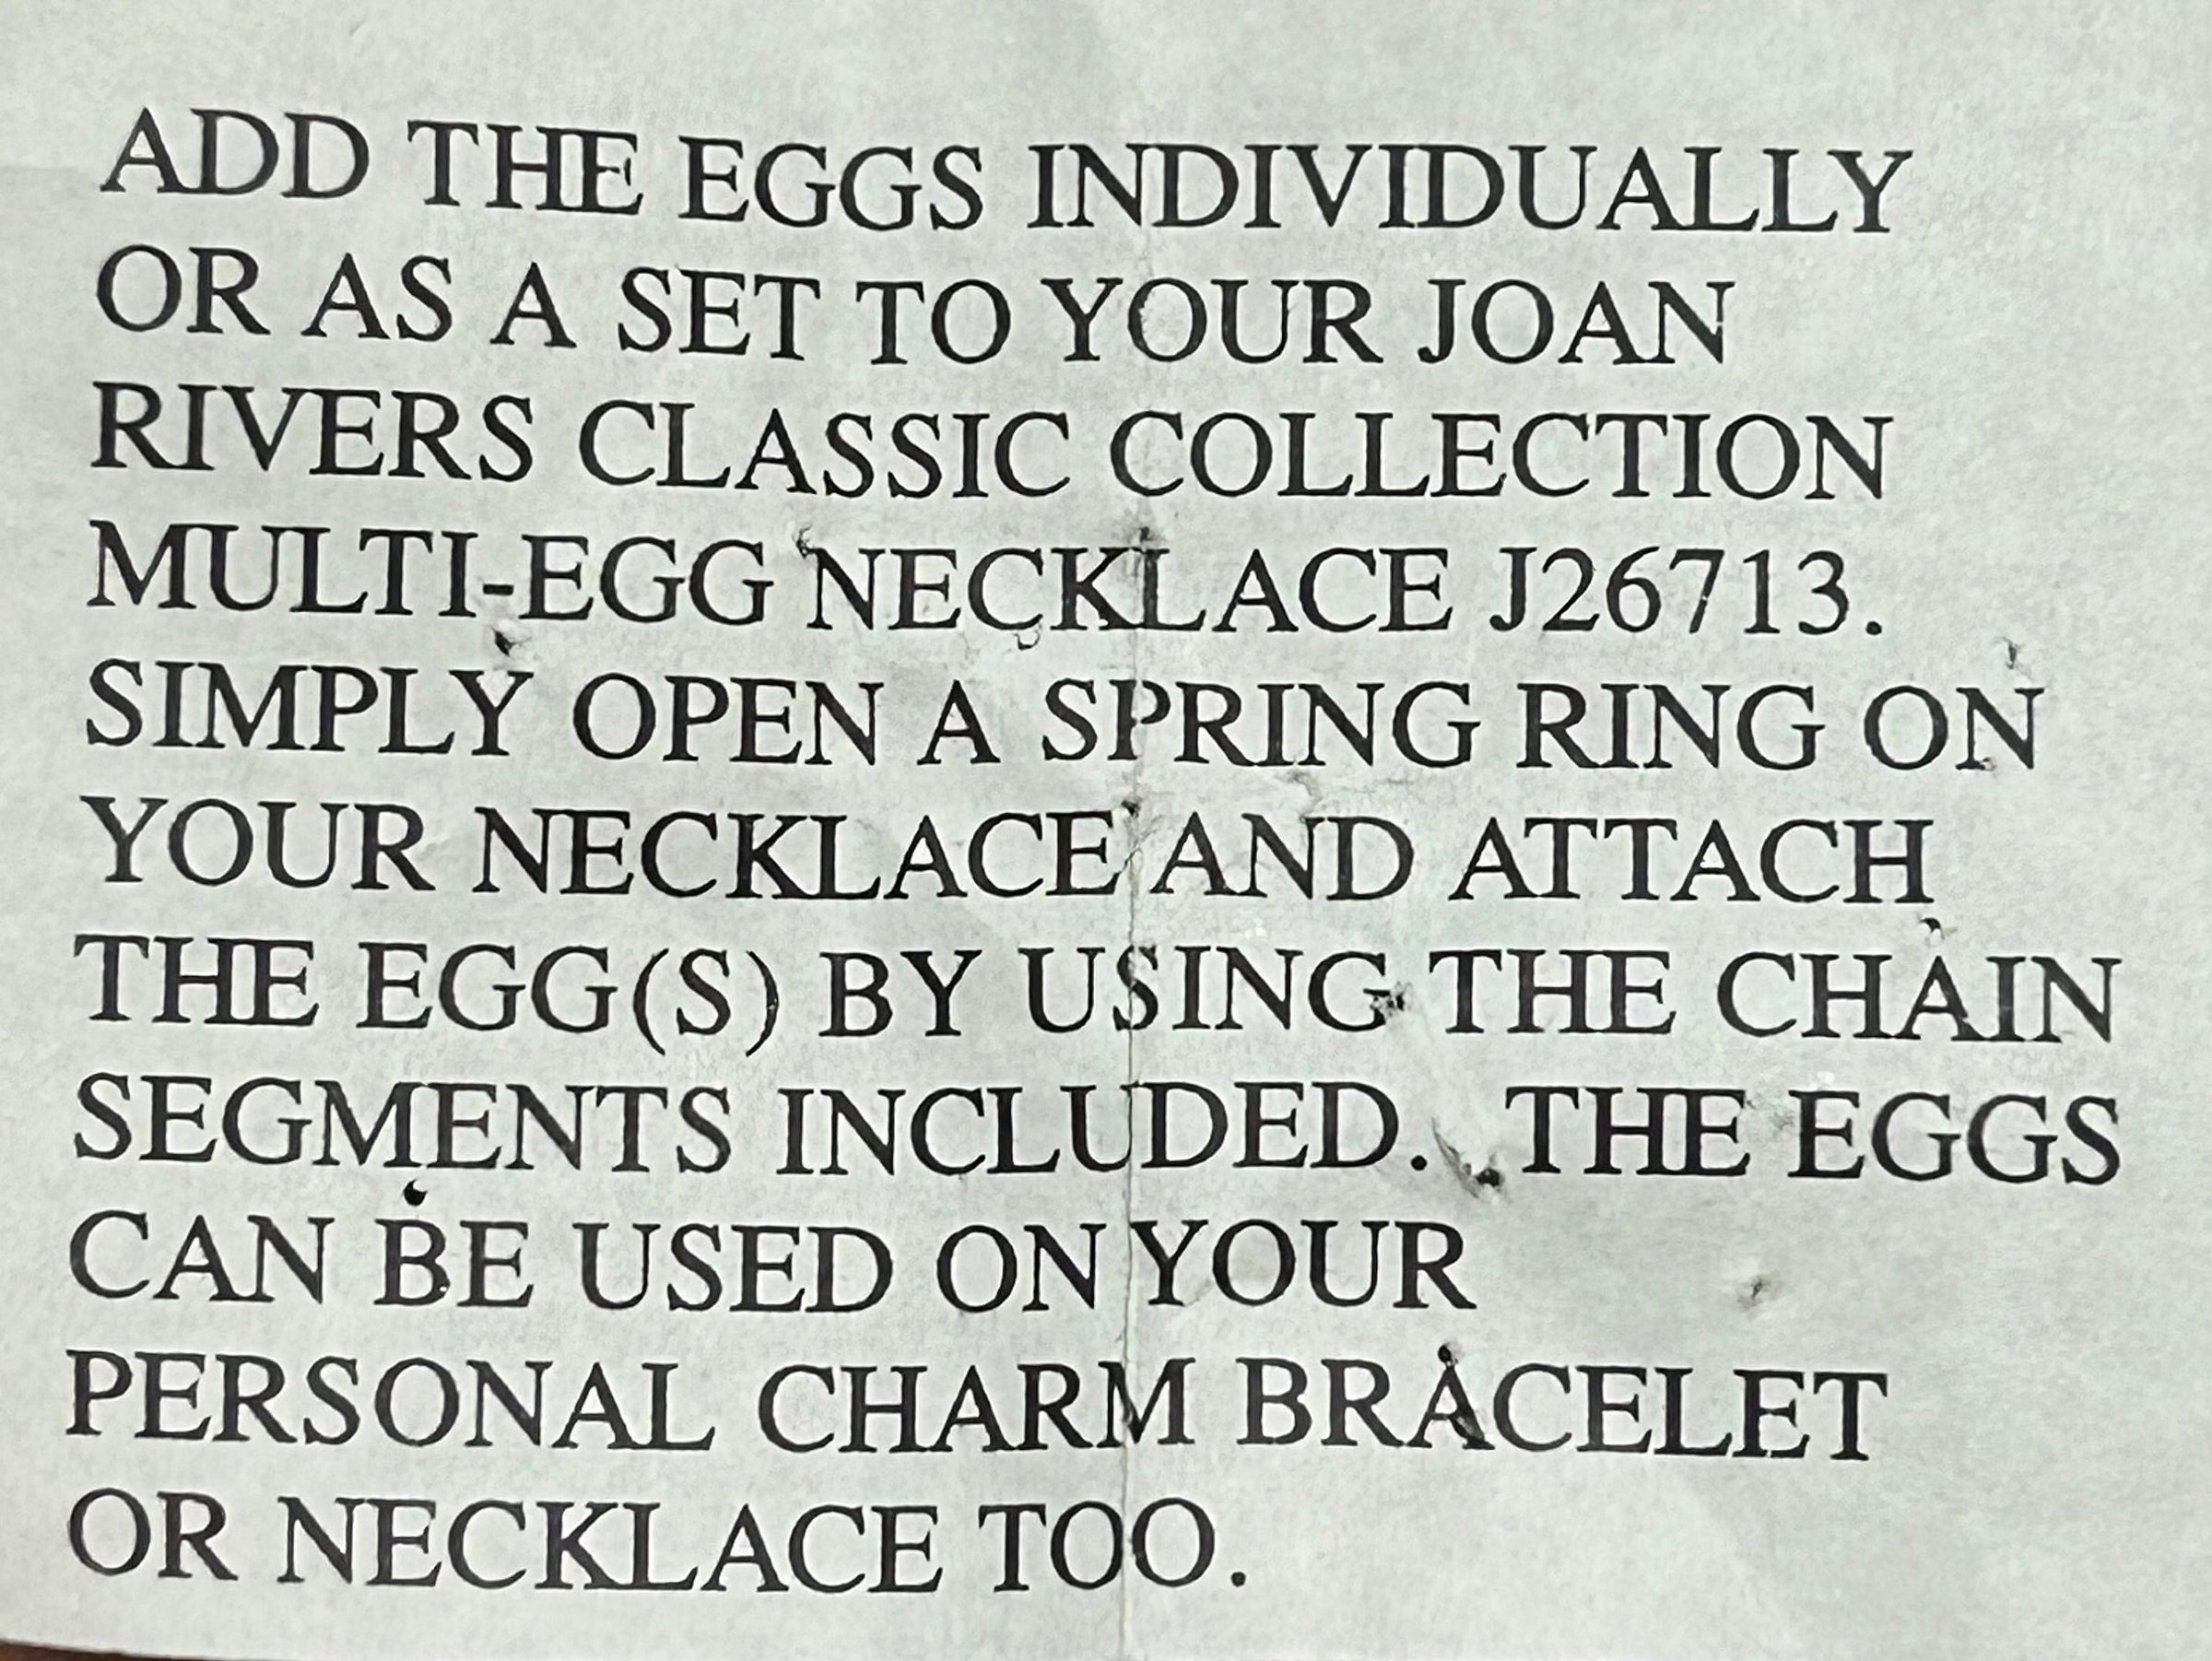 Joan Rivers Charms, Joan Rivers Egg, Charm Extension, Set of 3, Faberge Egg, Egg Necklace, Gold-Tone Charms, Locket Charm, Egg Charms